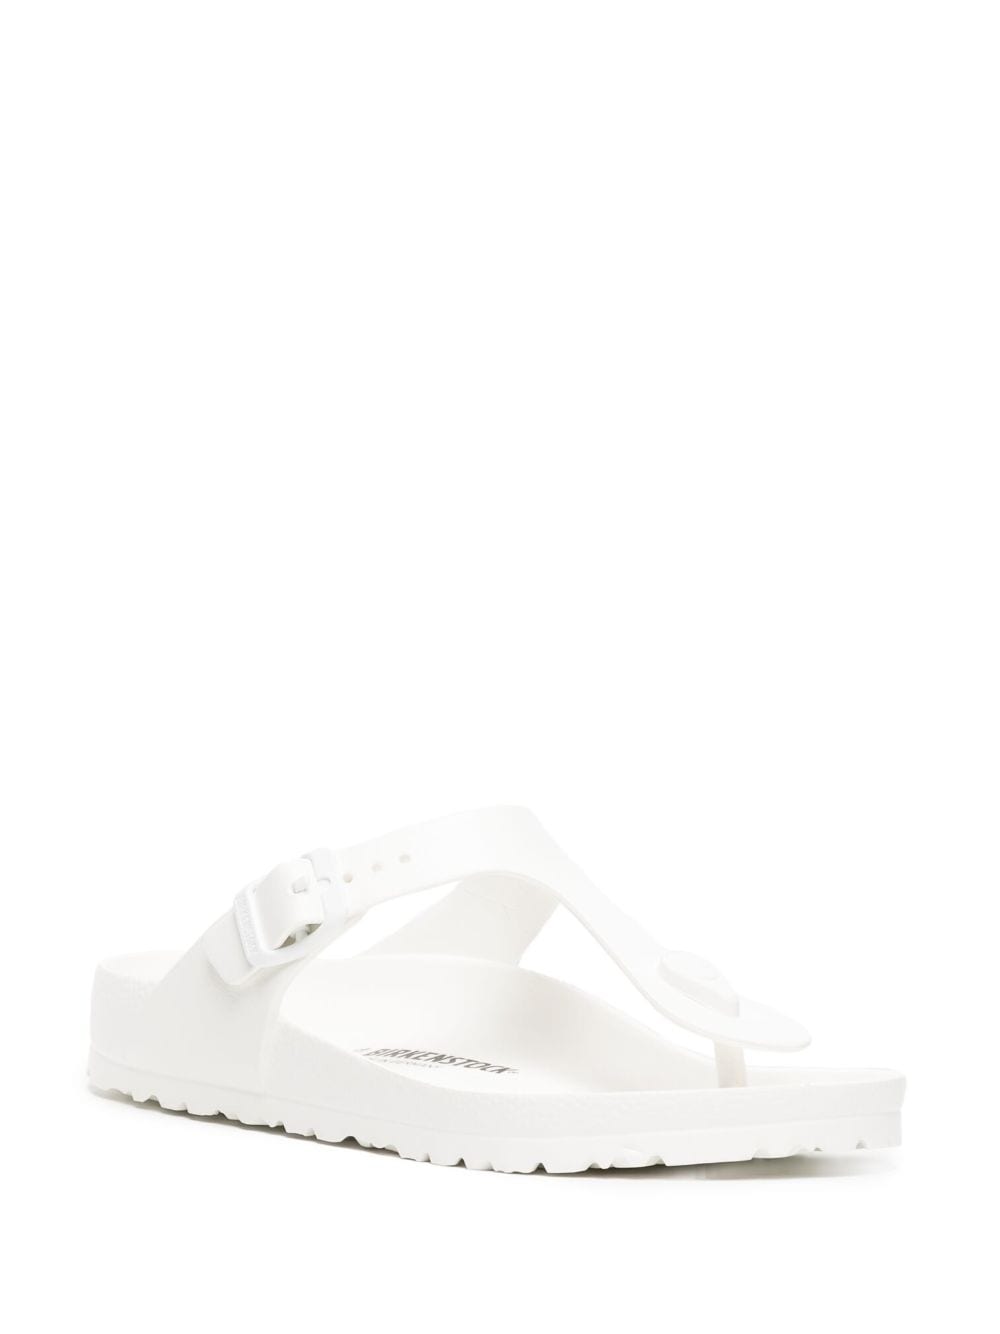 Farfetch Birkenstock Sale with Up to 60% Off